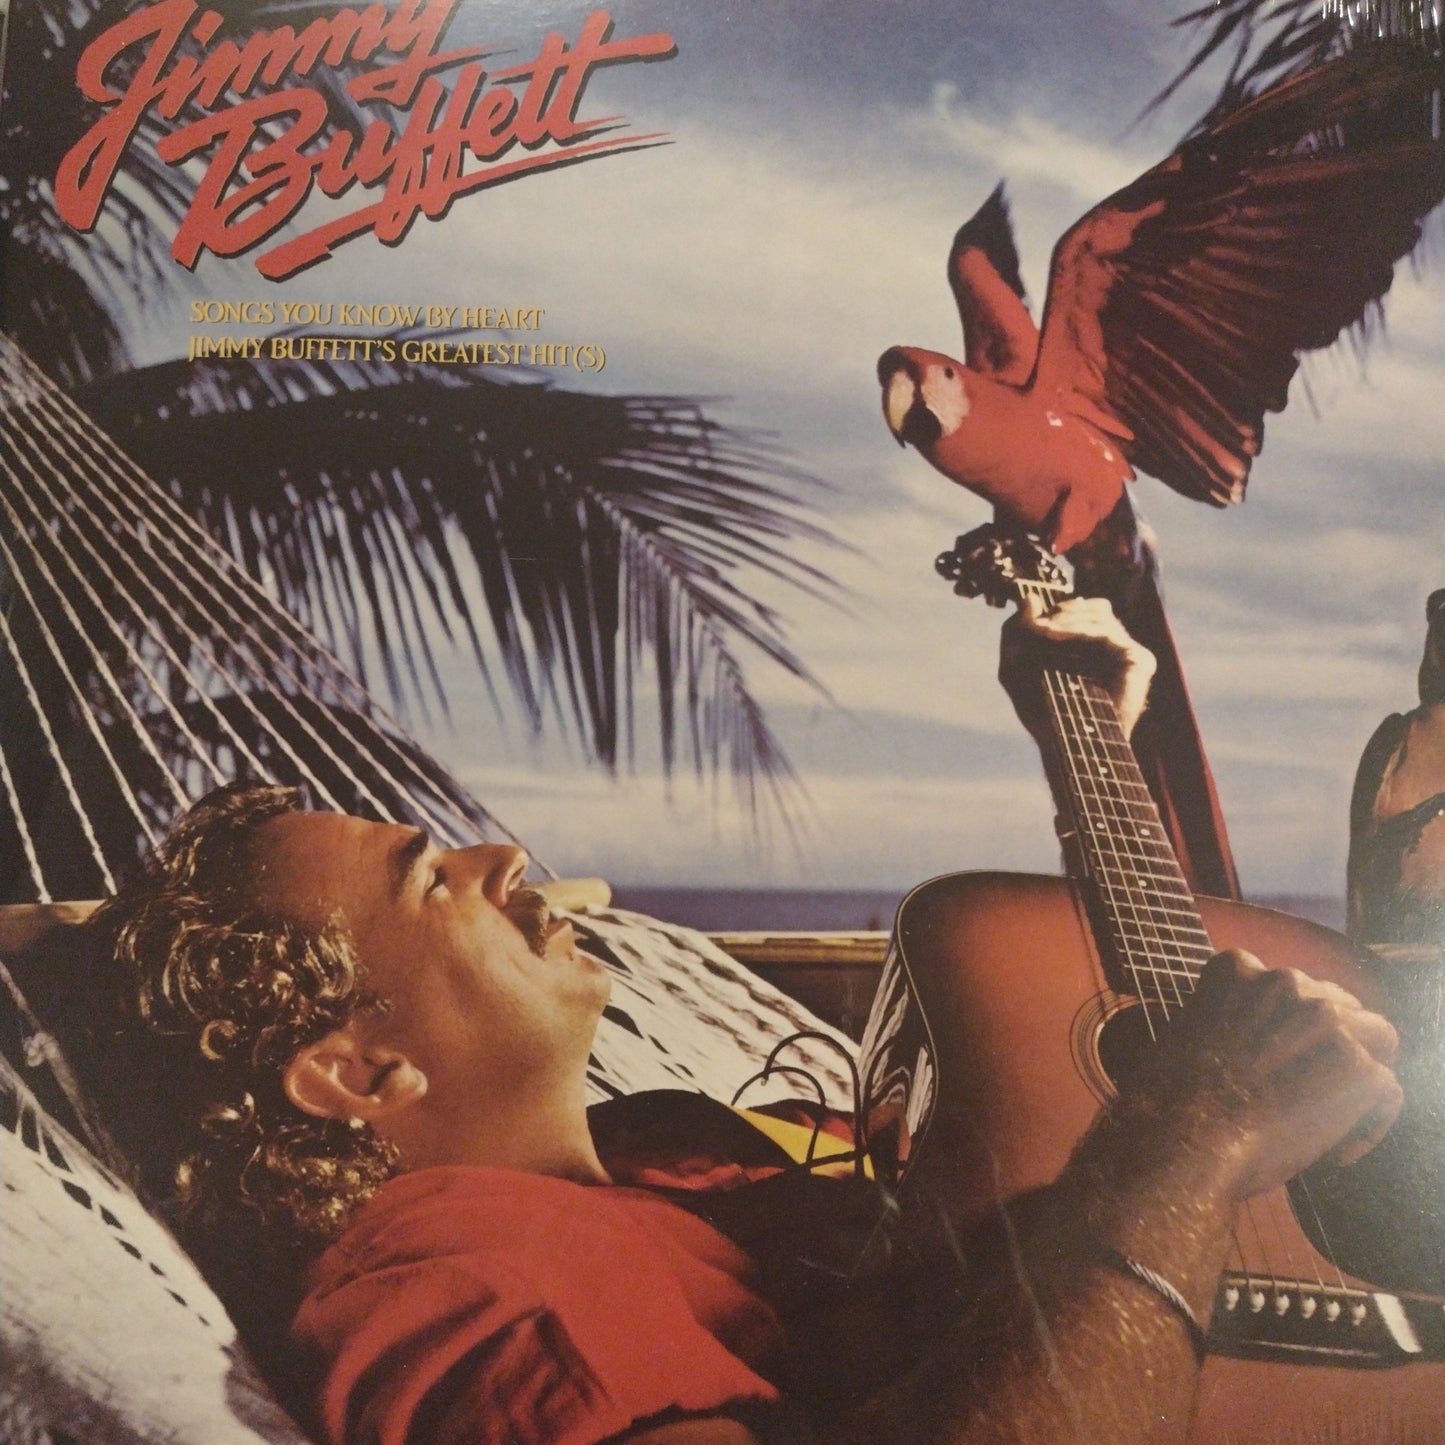 Songs you know by heart jimmy Buffett's greatest hits